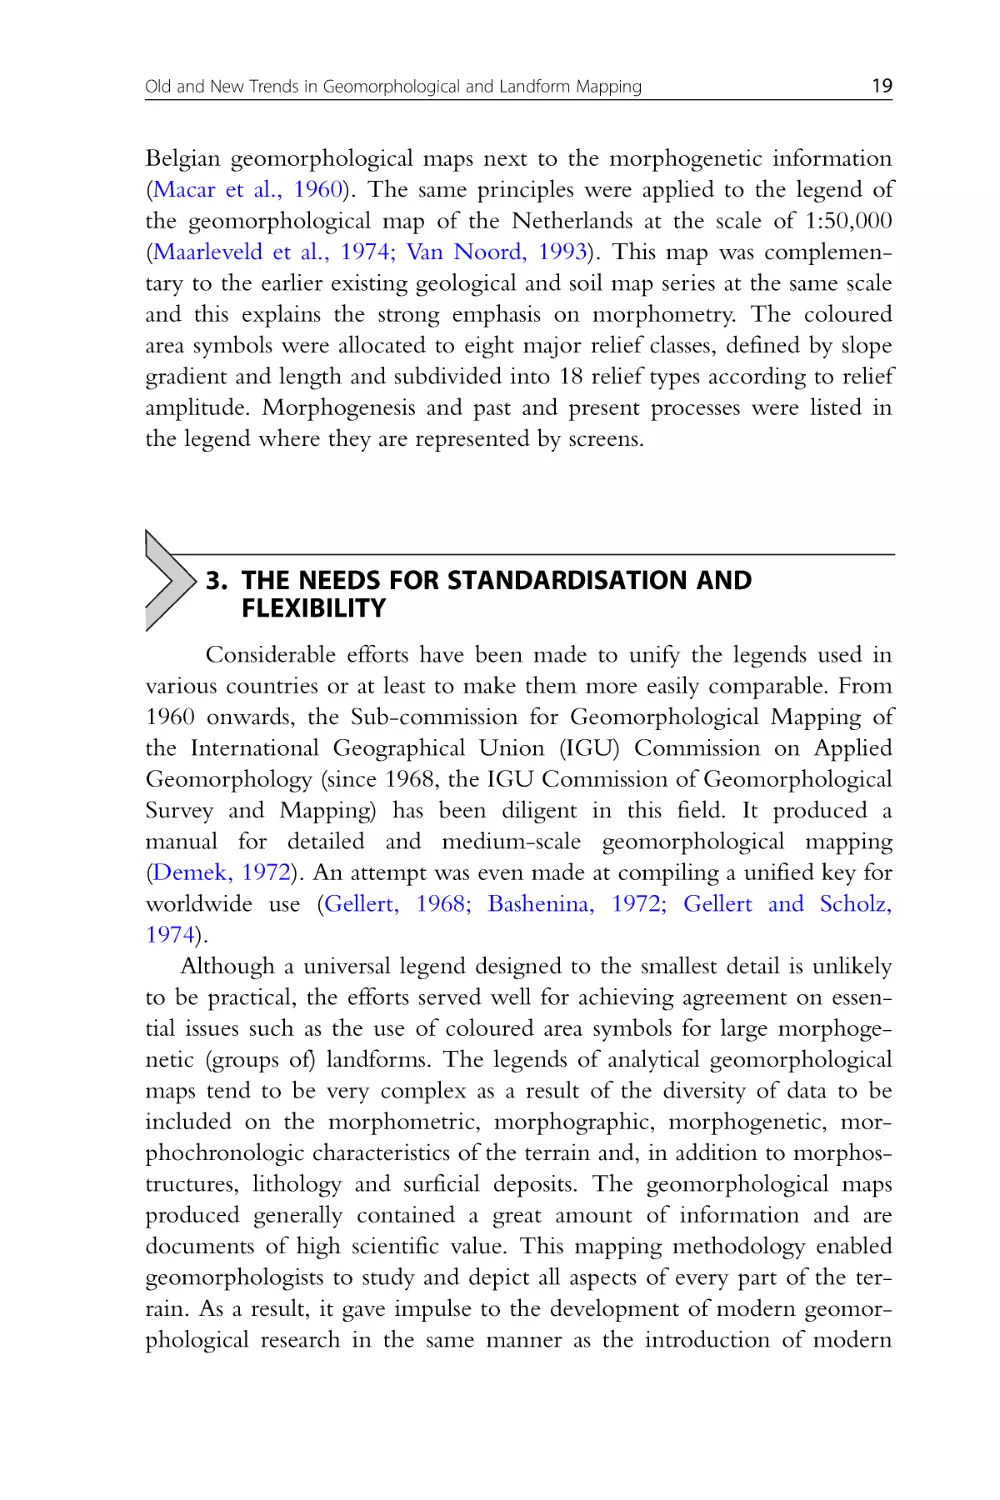 3. The Needs for Standardisation and Flexibility